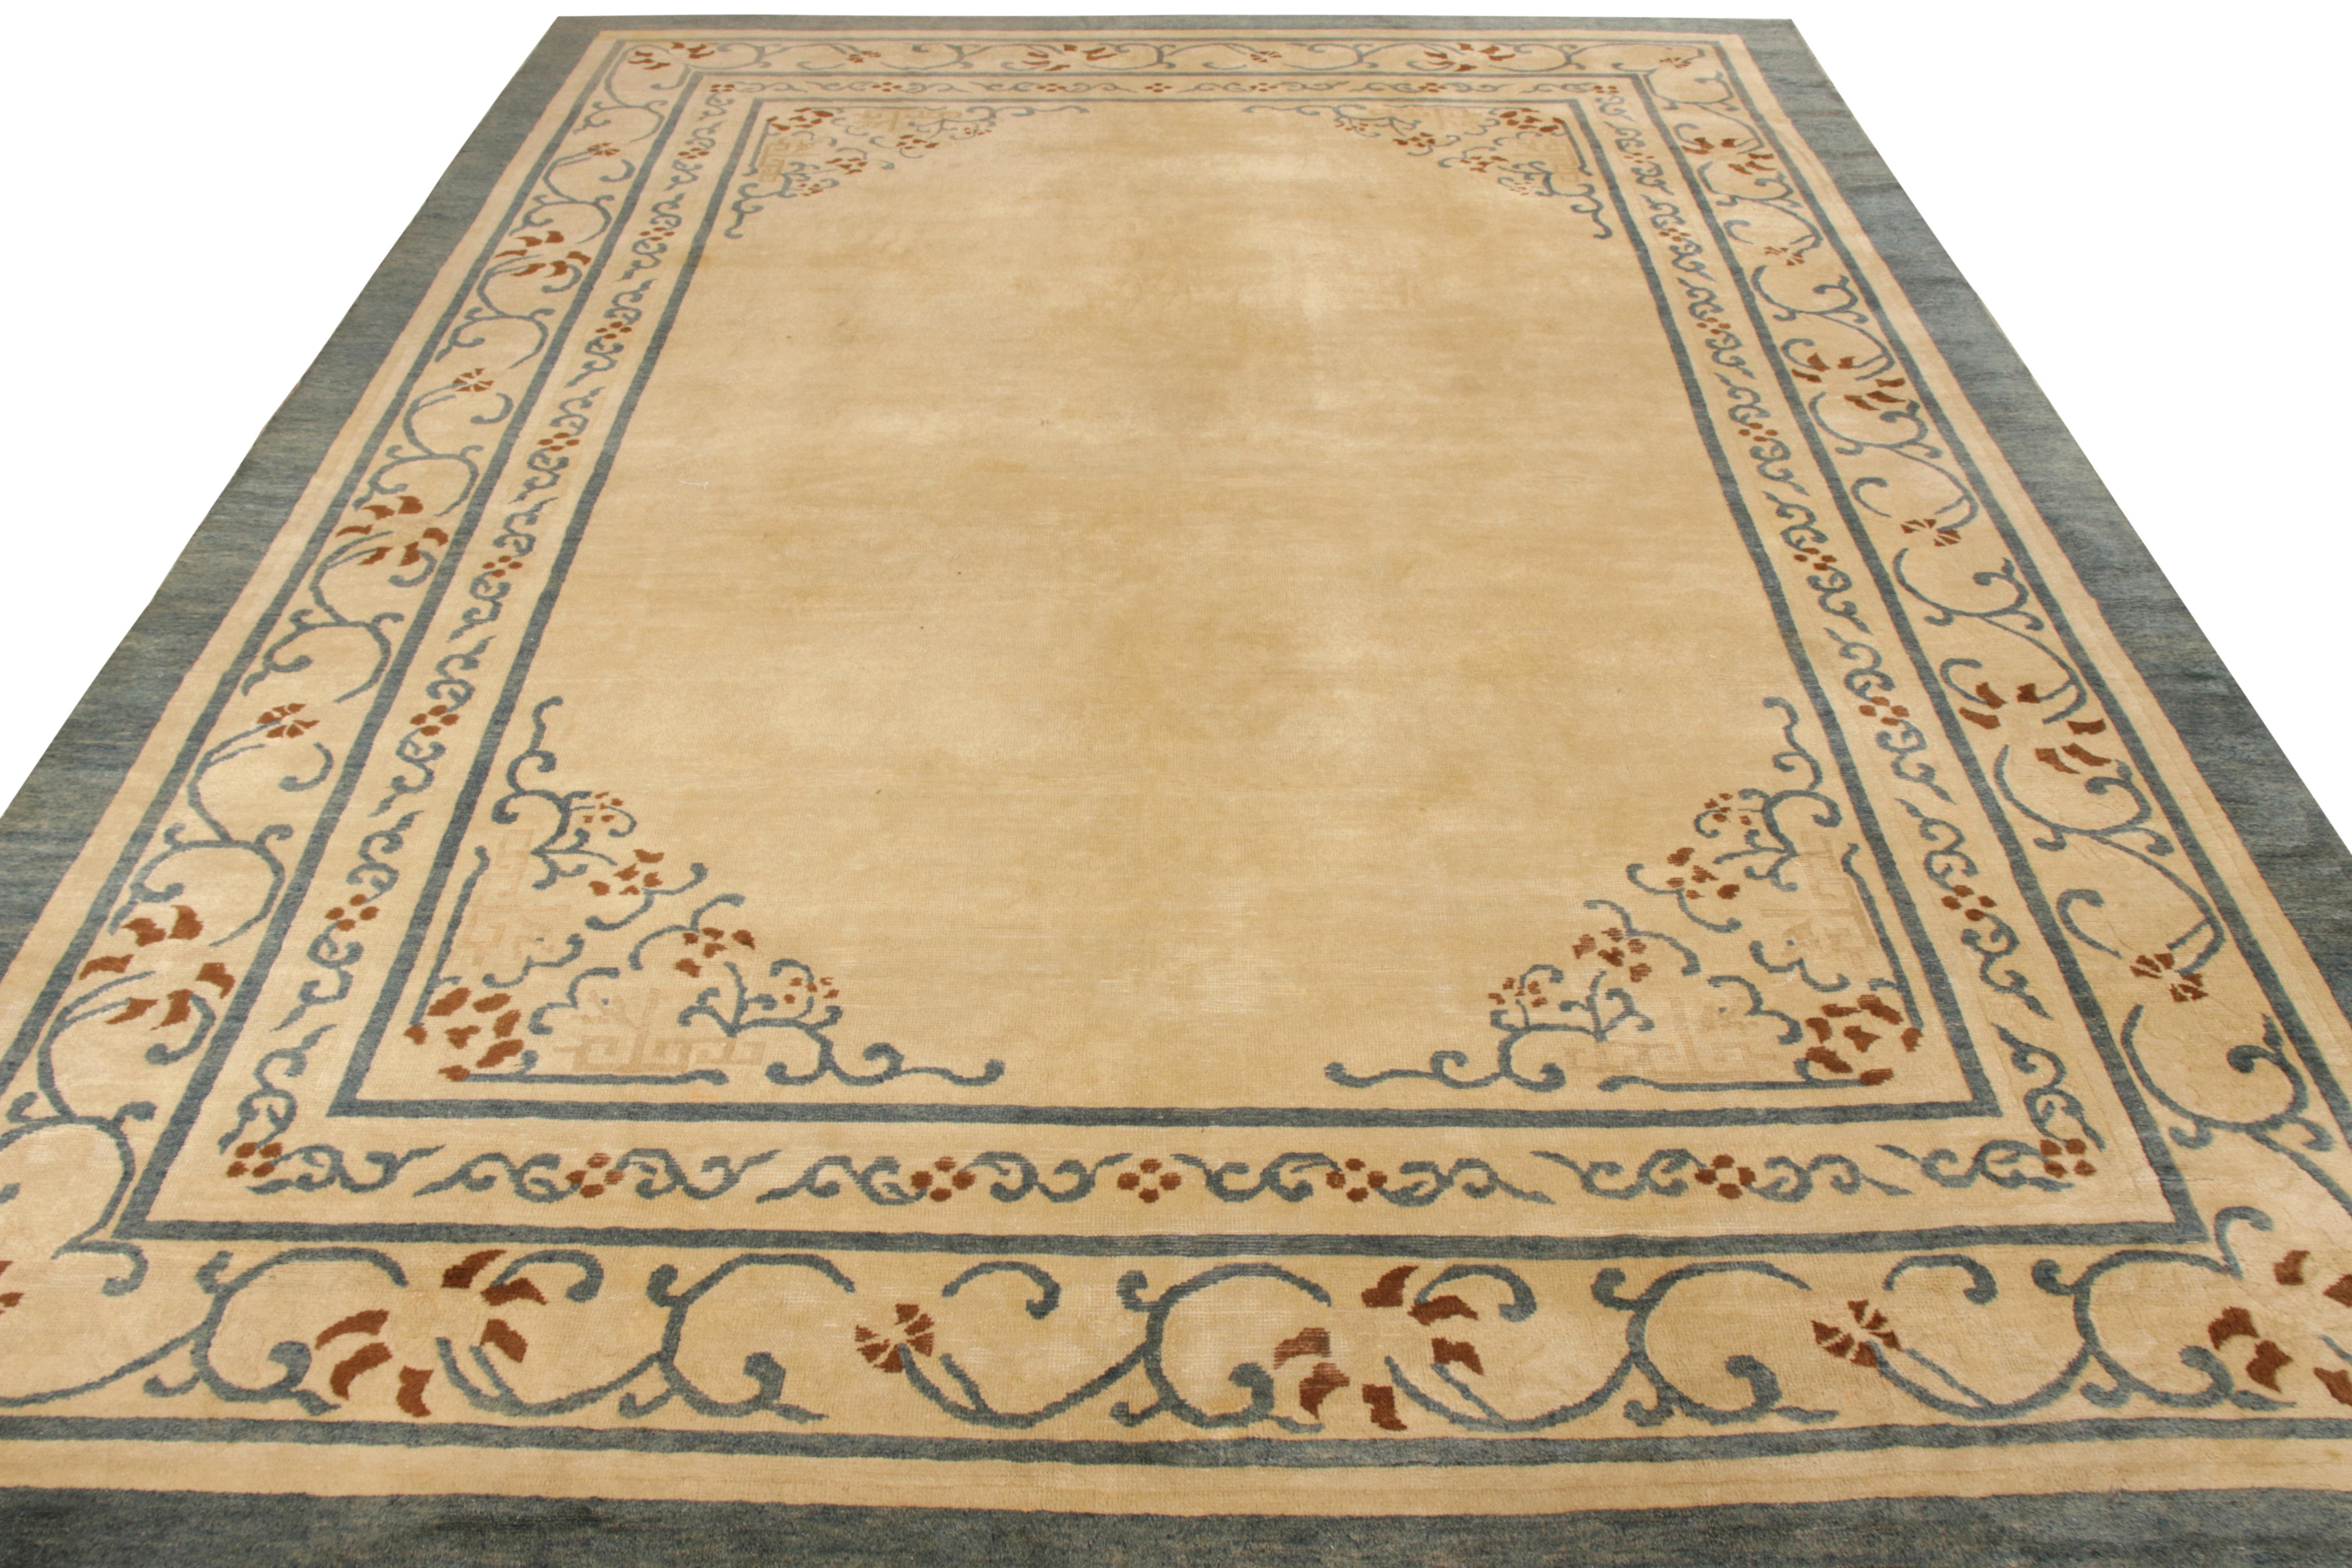 Hand knotted in wool, a fabulous Peking rug from Rug & Kilim’s Antique & Vintage Collection. A lavish 9x12 scale originating from China circa 1920-1930, the rug witnesses an open field encased in a sophisticated floral border. The design marries a